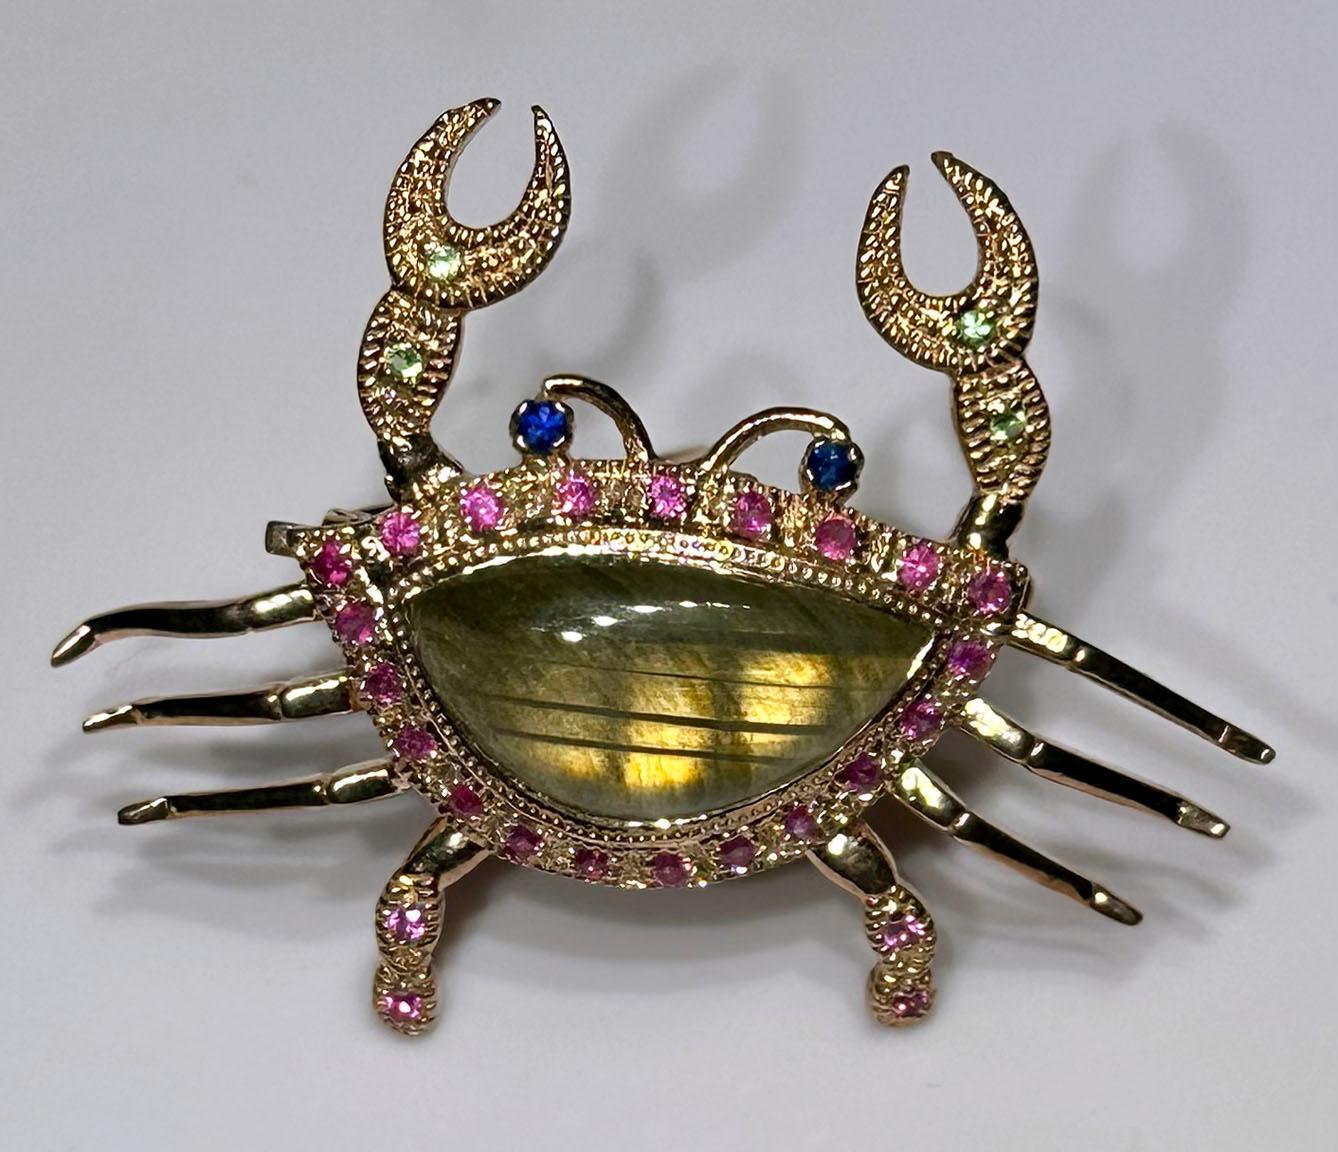 This one of a kind Rose Gold Plated Silver Crab Brooch/Pendant is set with Sapphire, Labradorite & Tsavorite garnets. The body of the crab is one large cabochon Labradorite. The Brooch has a fold down Bail so that this piece can be used as either a